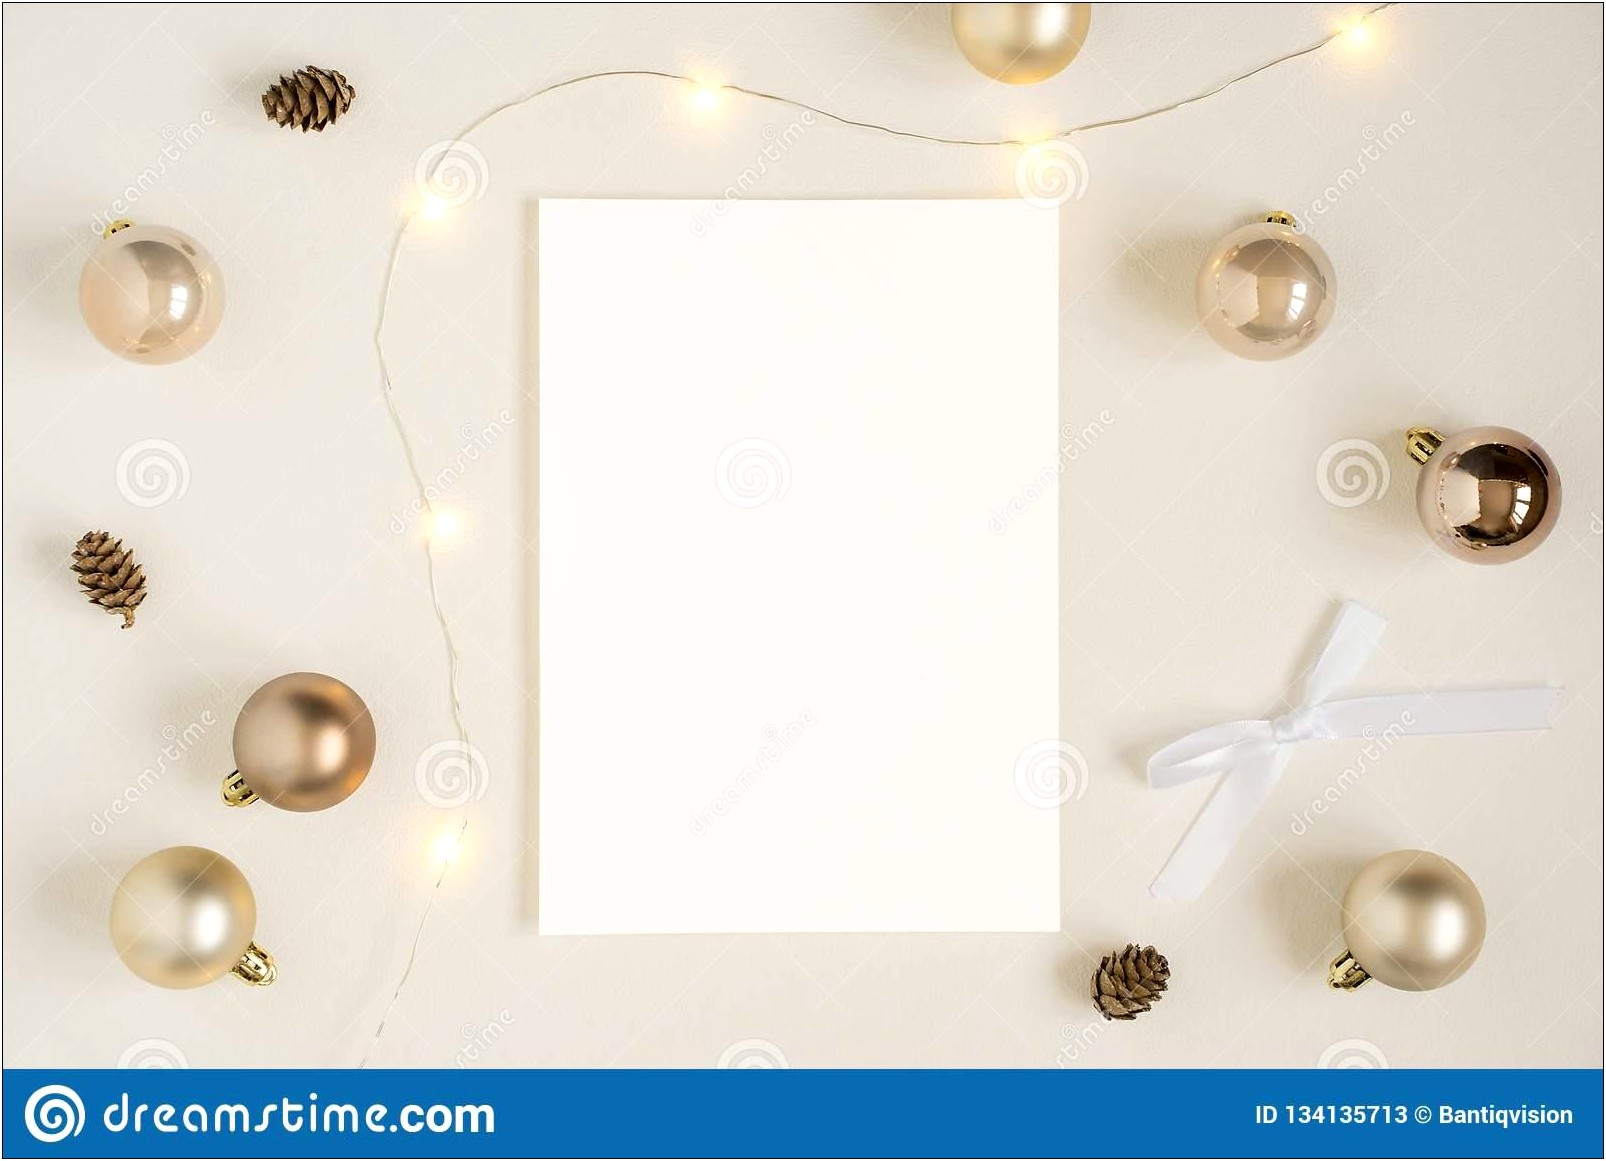 Free Merry Christmas Header Templates For Stationary